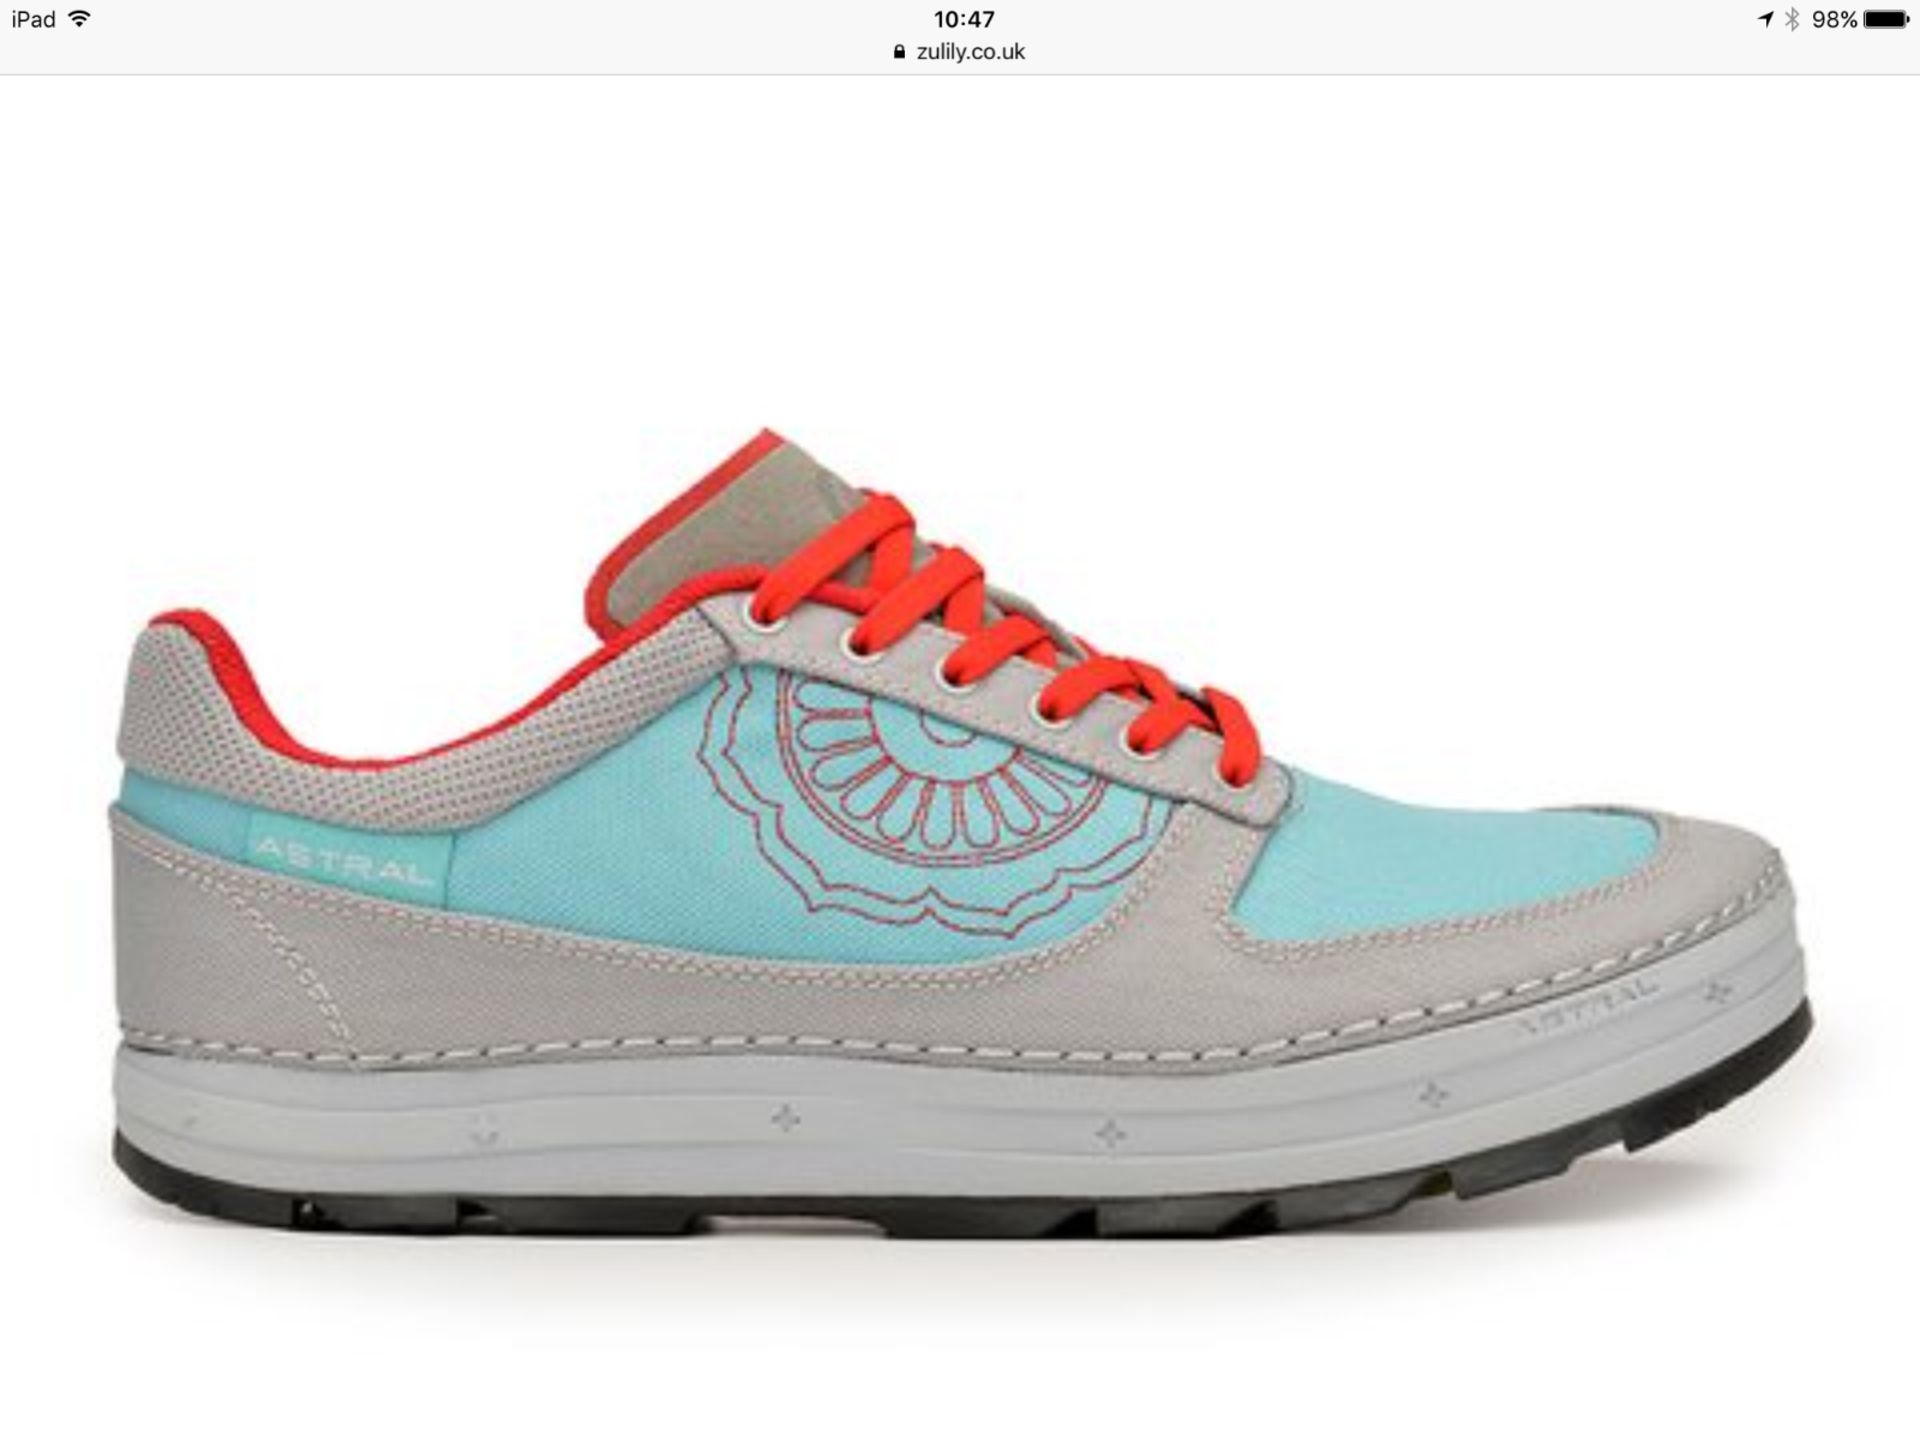 ASTRAL Turquoise & Granite Grey Tinker Sneaker, Size UK 8.5 (New with box) [Ref: 43759909] - Image 3 of 7